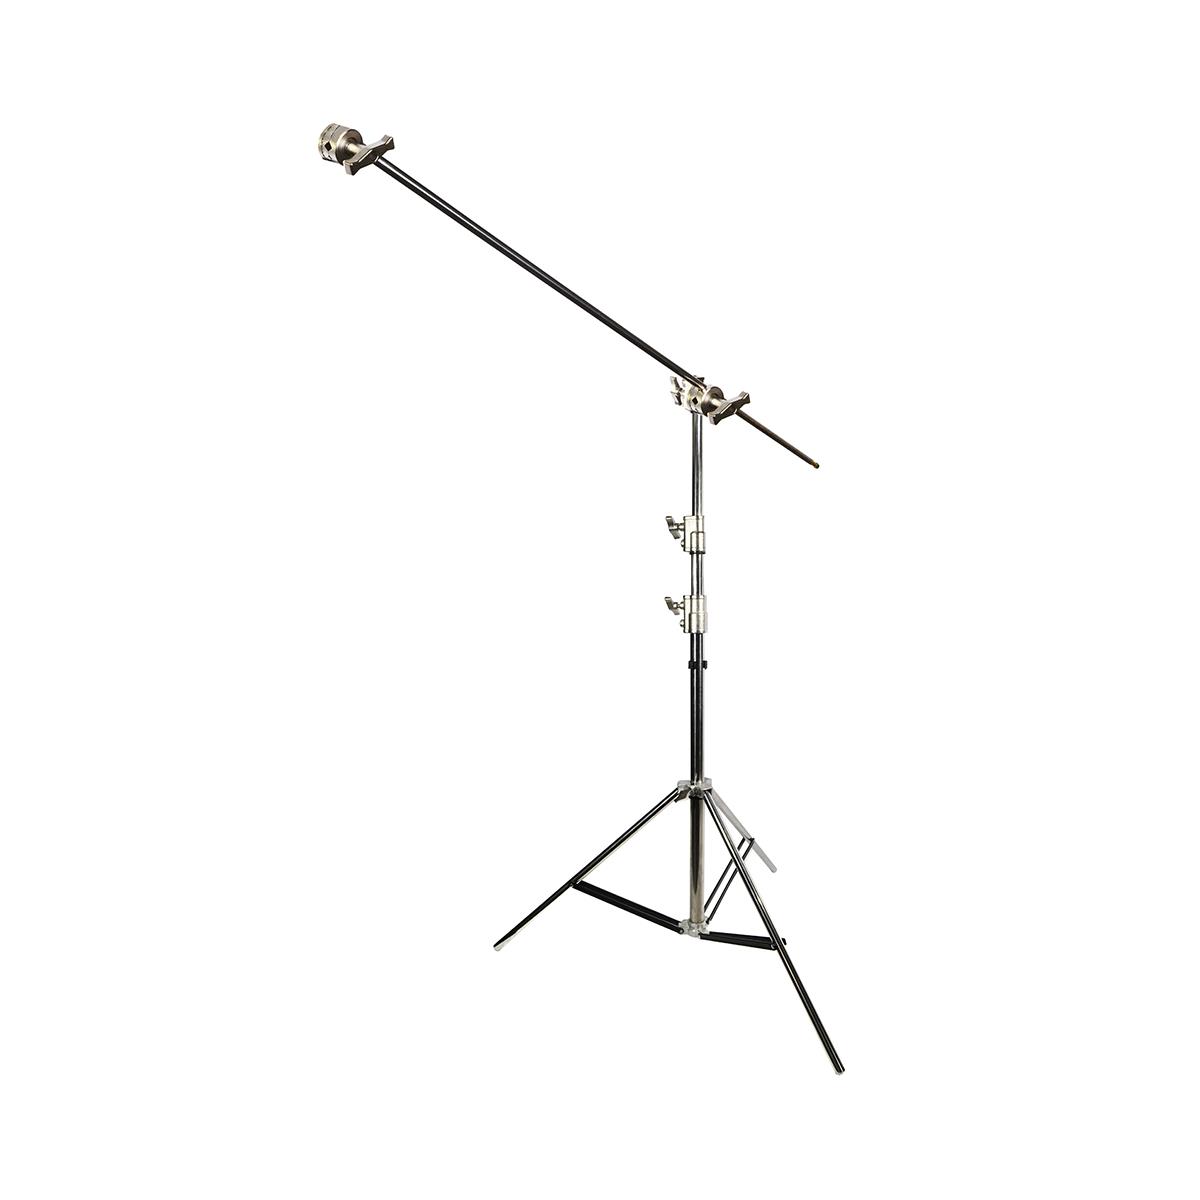 Image of Savage 10' Pro Duty Steel Drop Stand with Steel Boom Arm